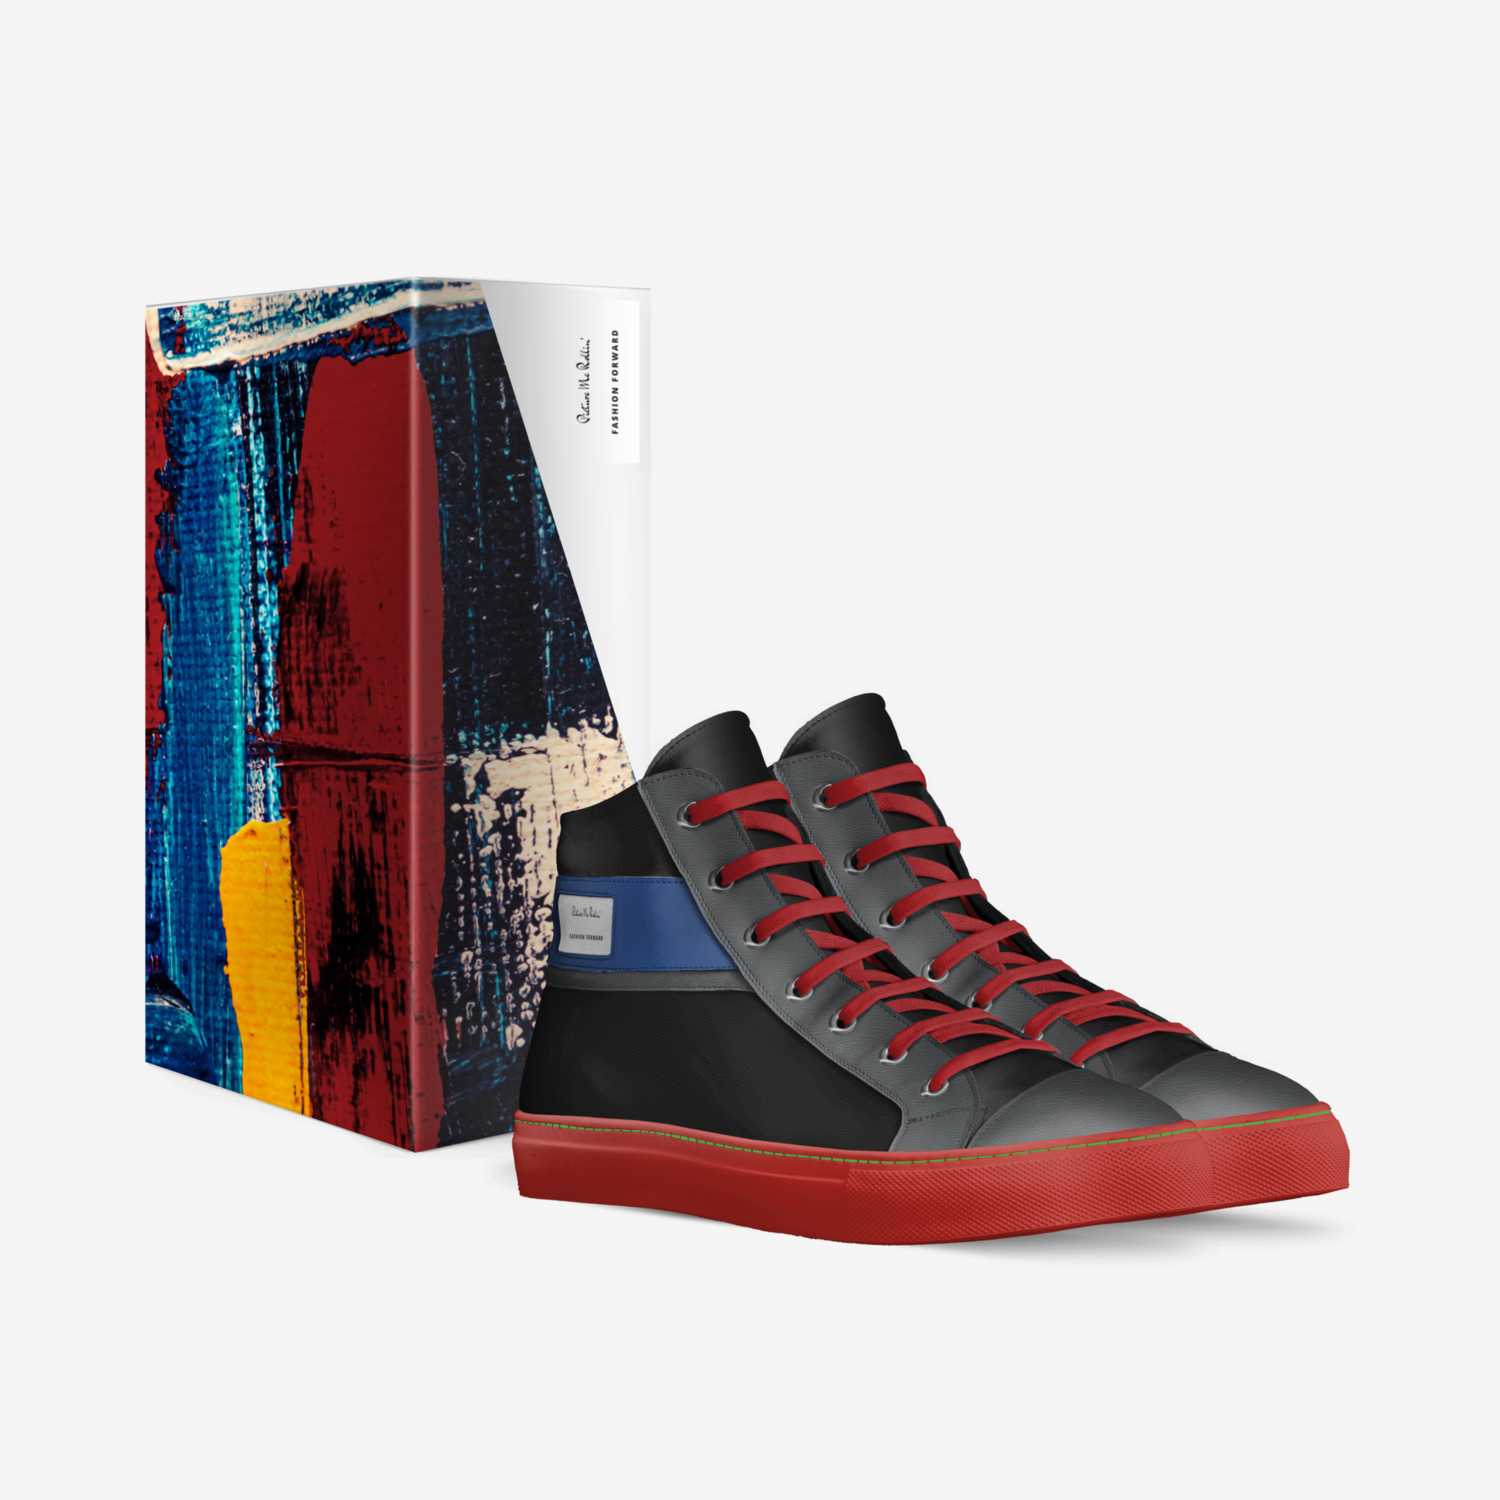 Picture Me Rollin' custom made in Italy shoes by Dorian Baham | Box view